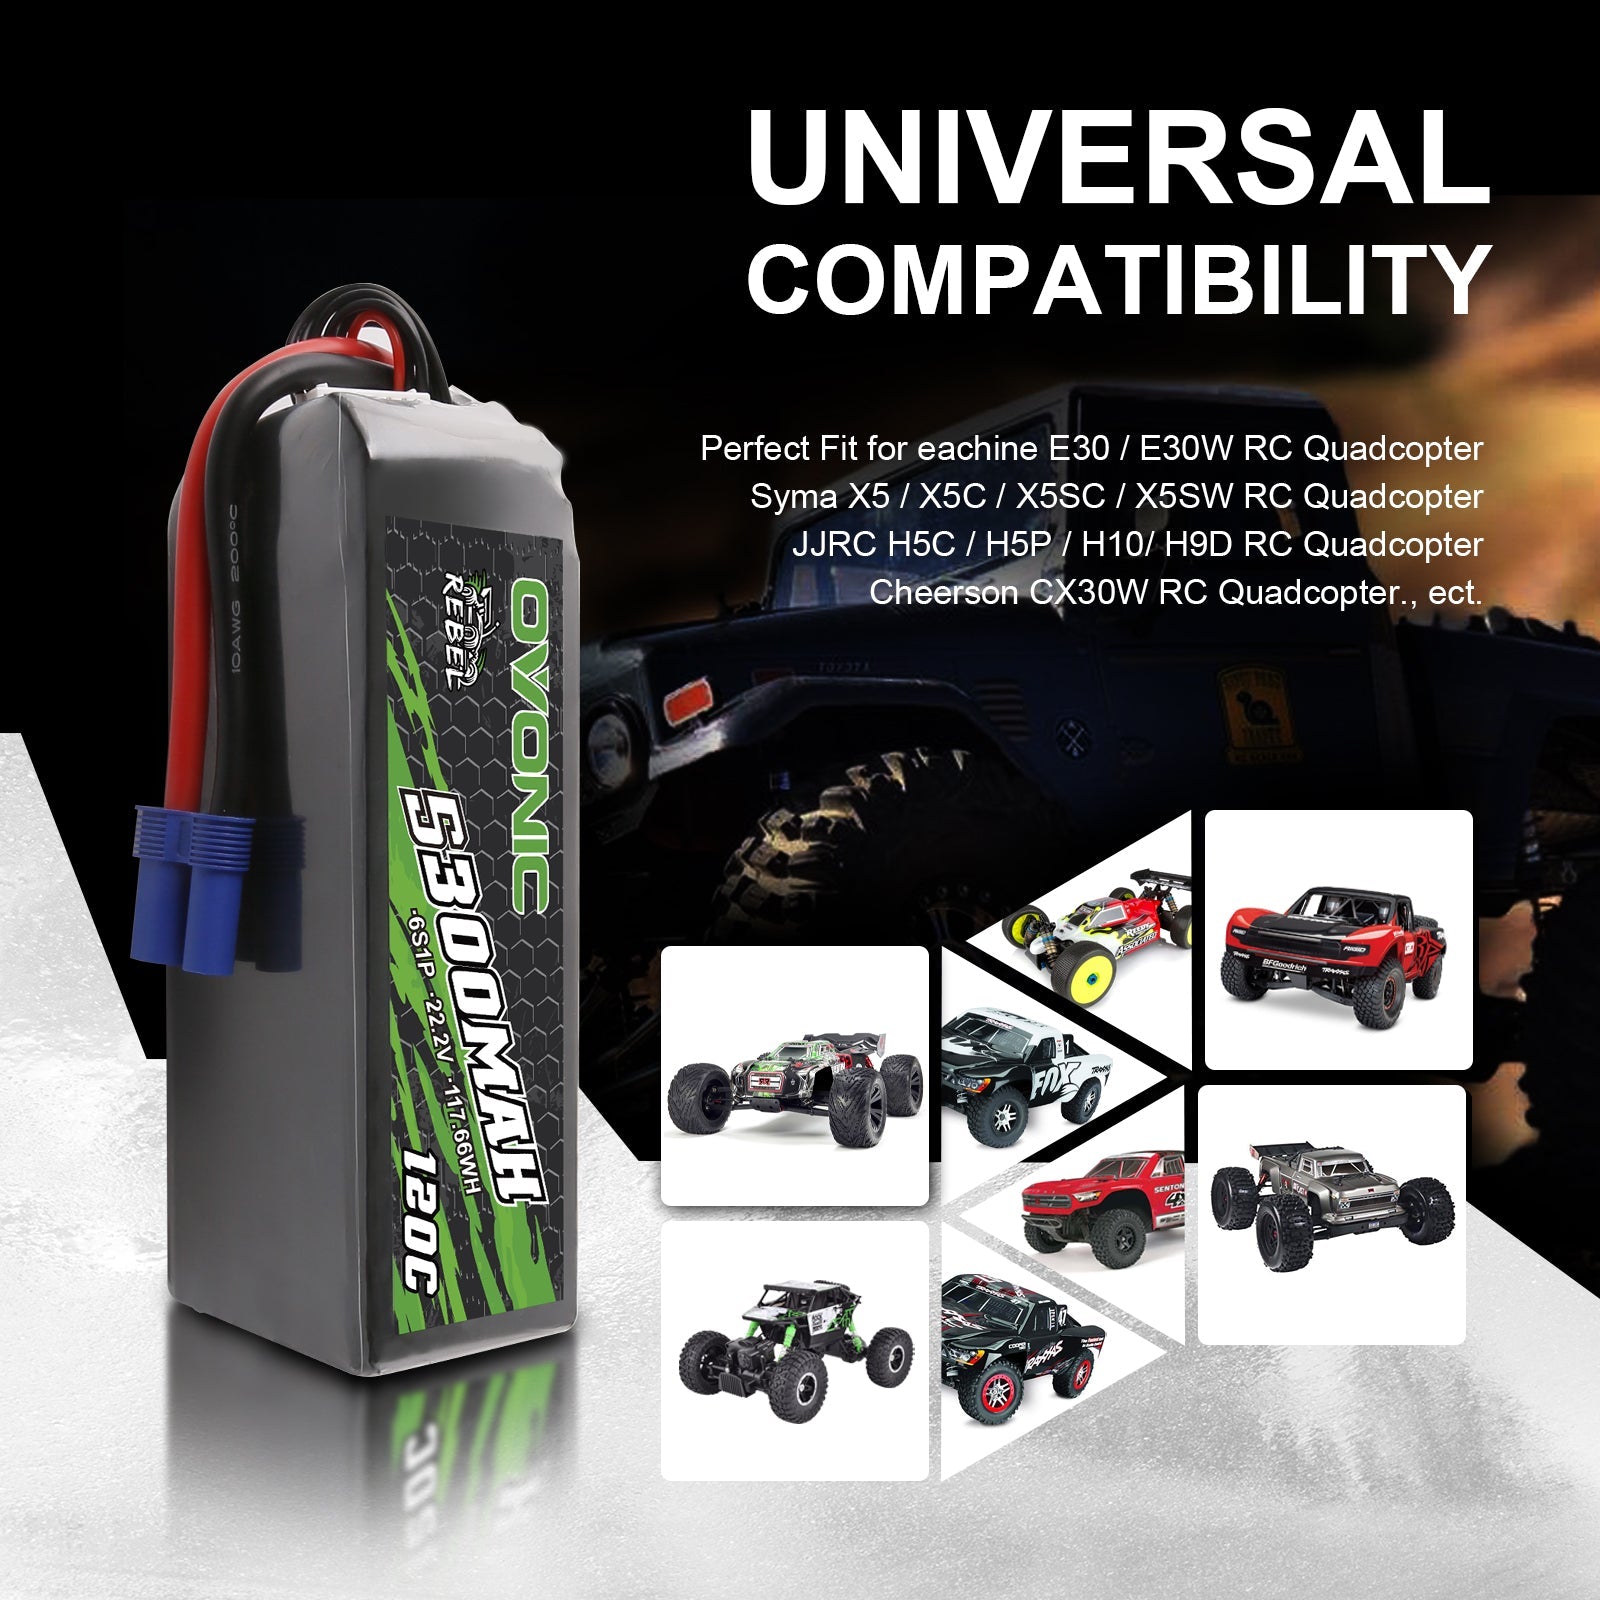 Ovonic Rebel 120C 6S 5300mAh 22.2V LiPo Battery with EC5 Plug for RC buggy